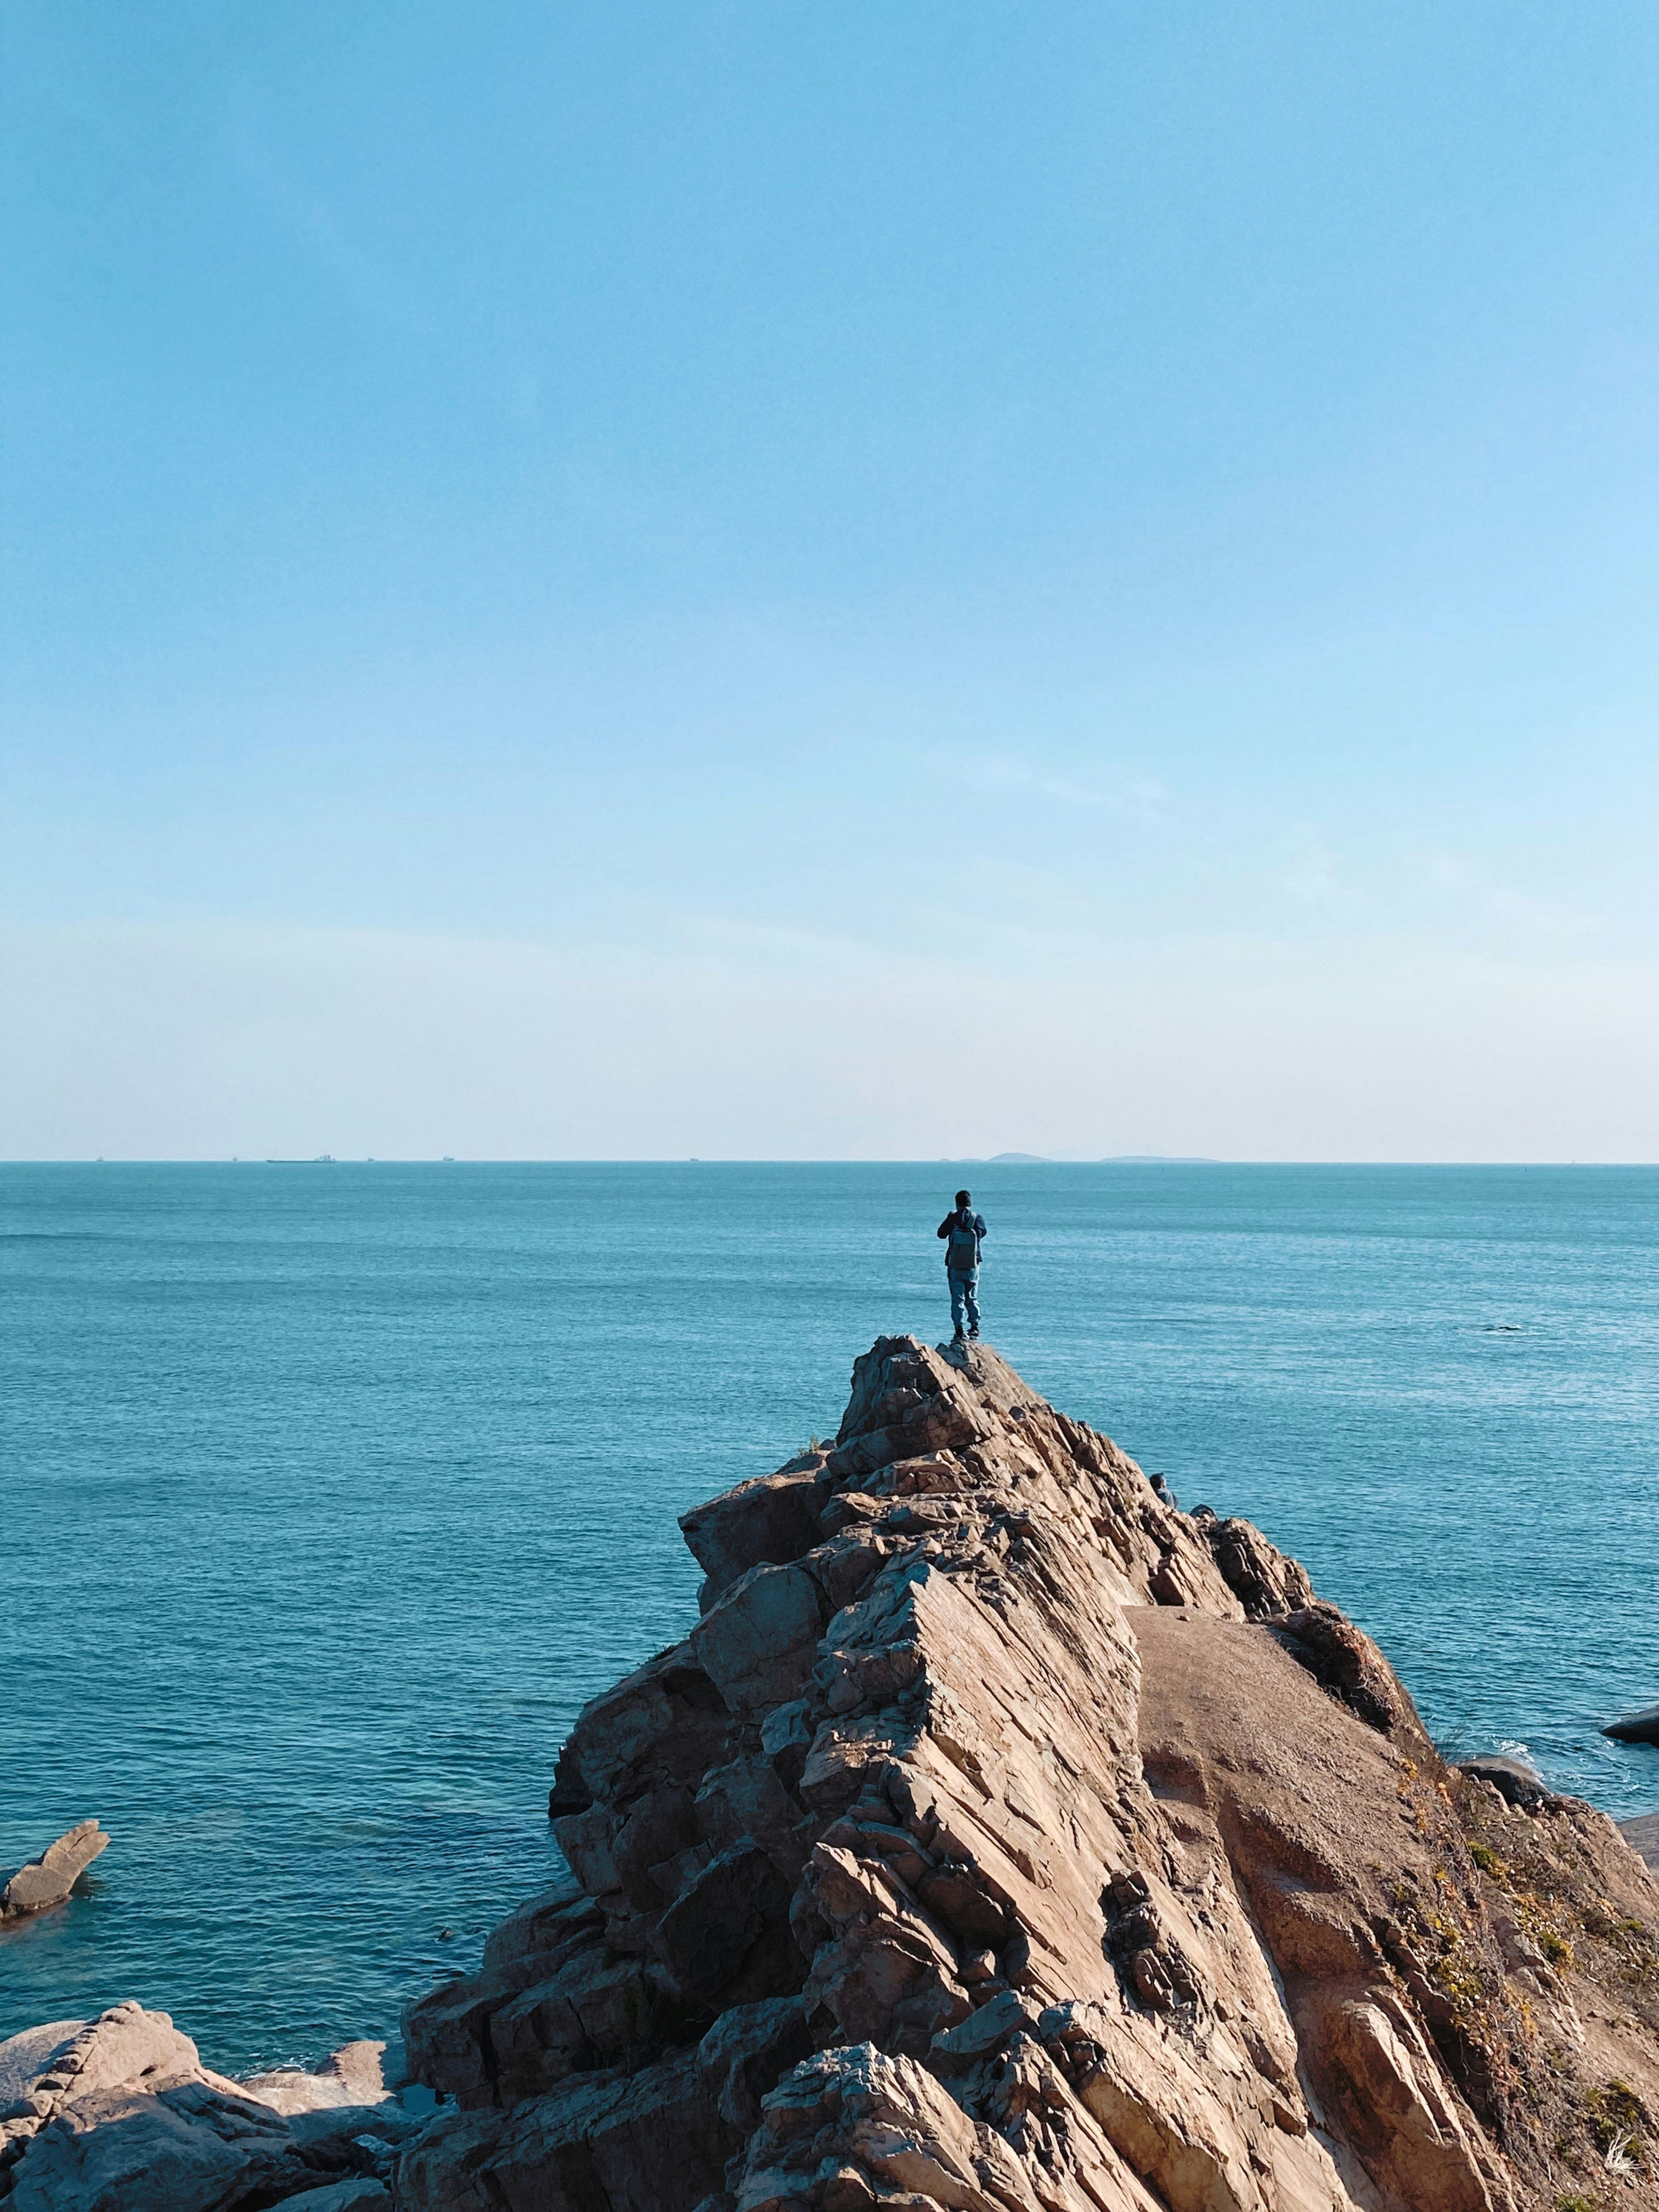 person standing on rock formation near sea during daytime